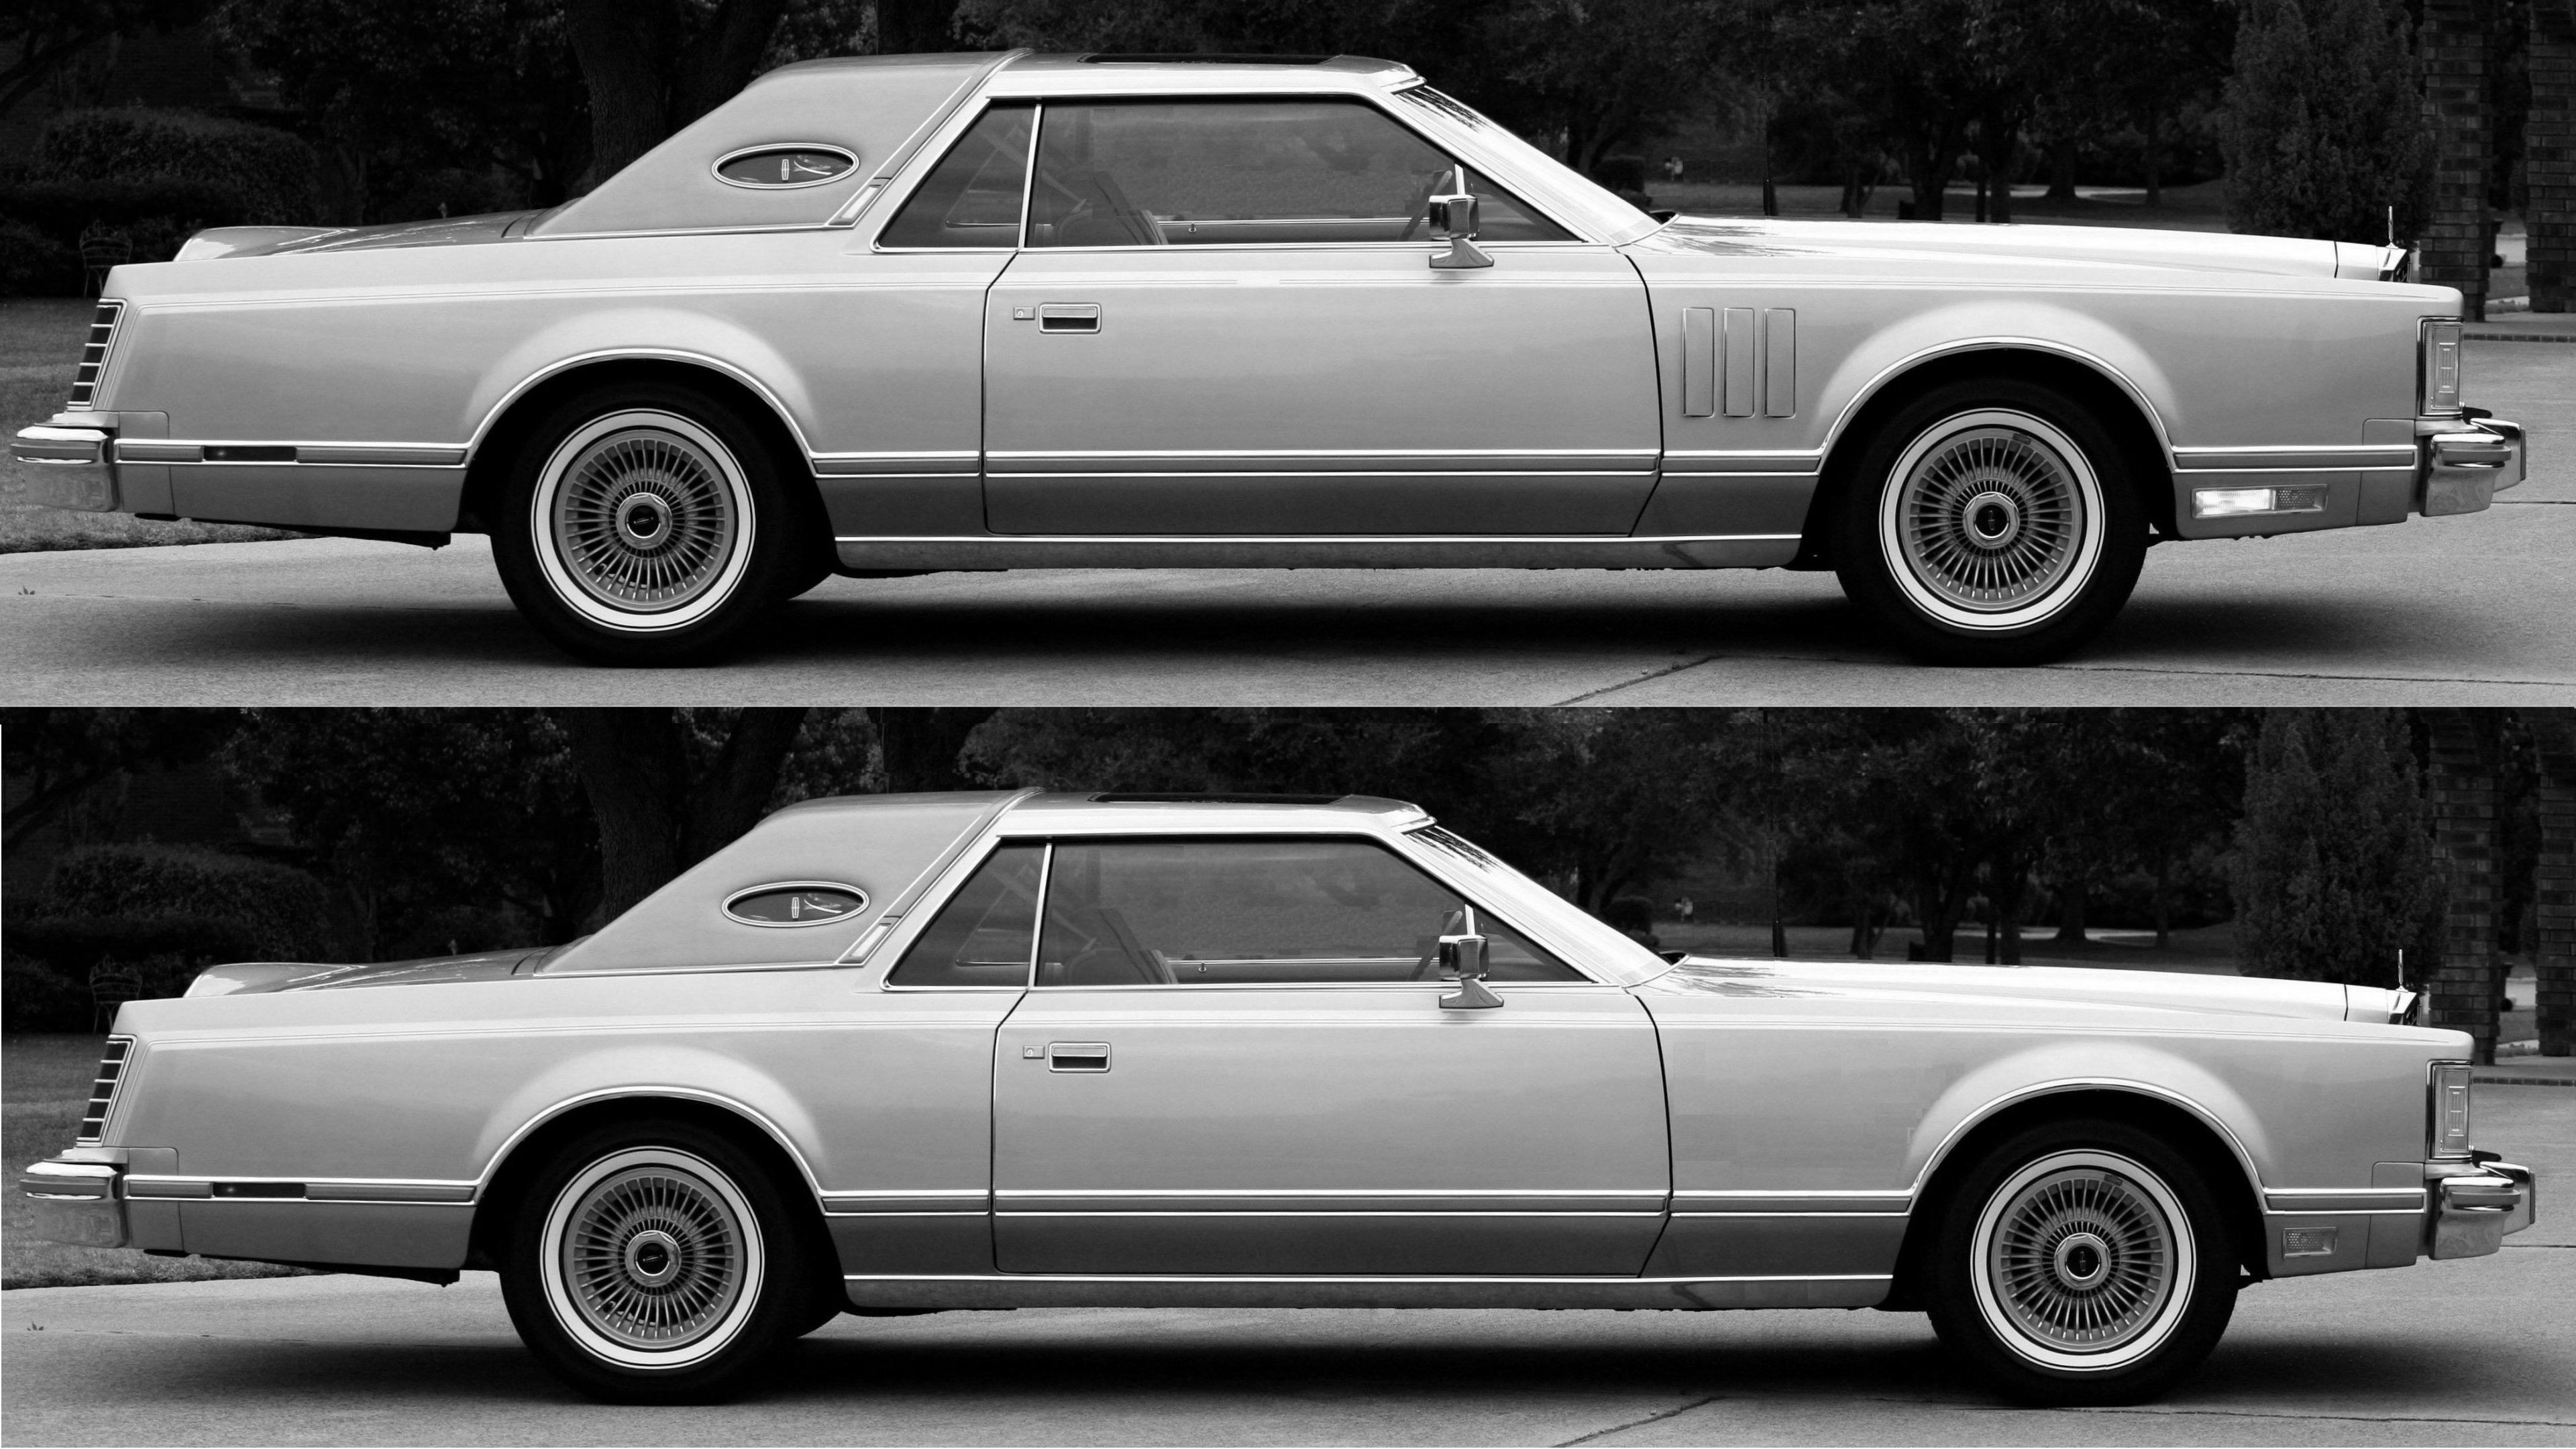 lincoln, mark v, long wheelbase, stretched, less front overhang, 1977, 1978, 1979